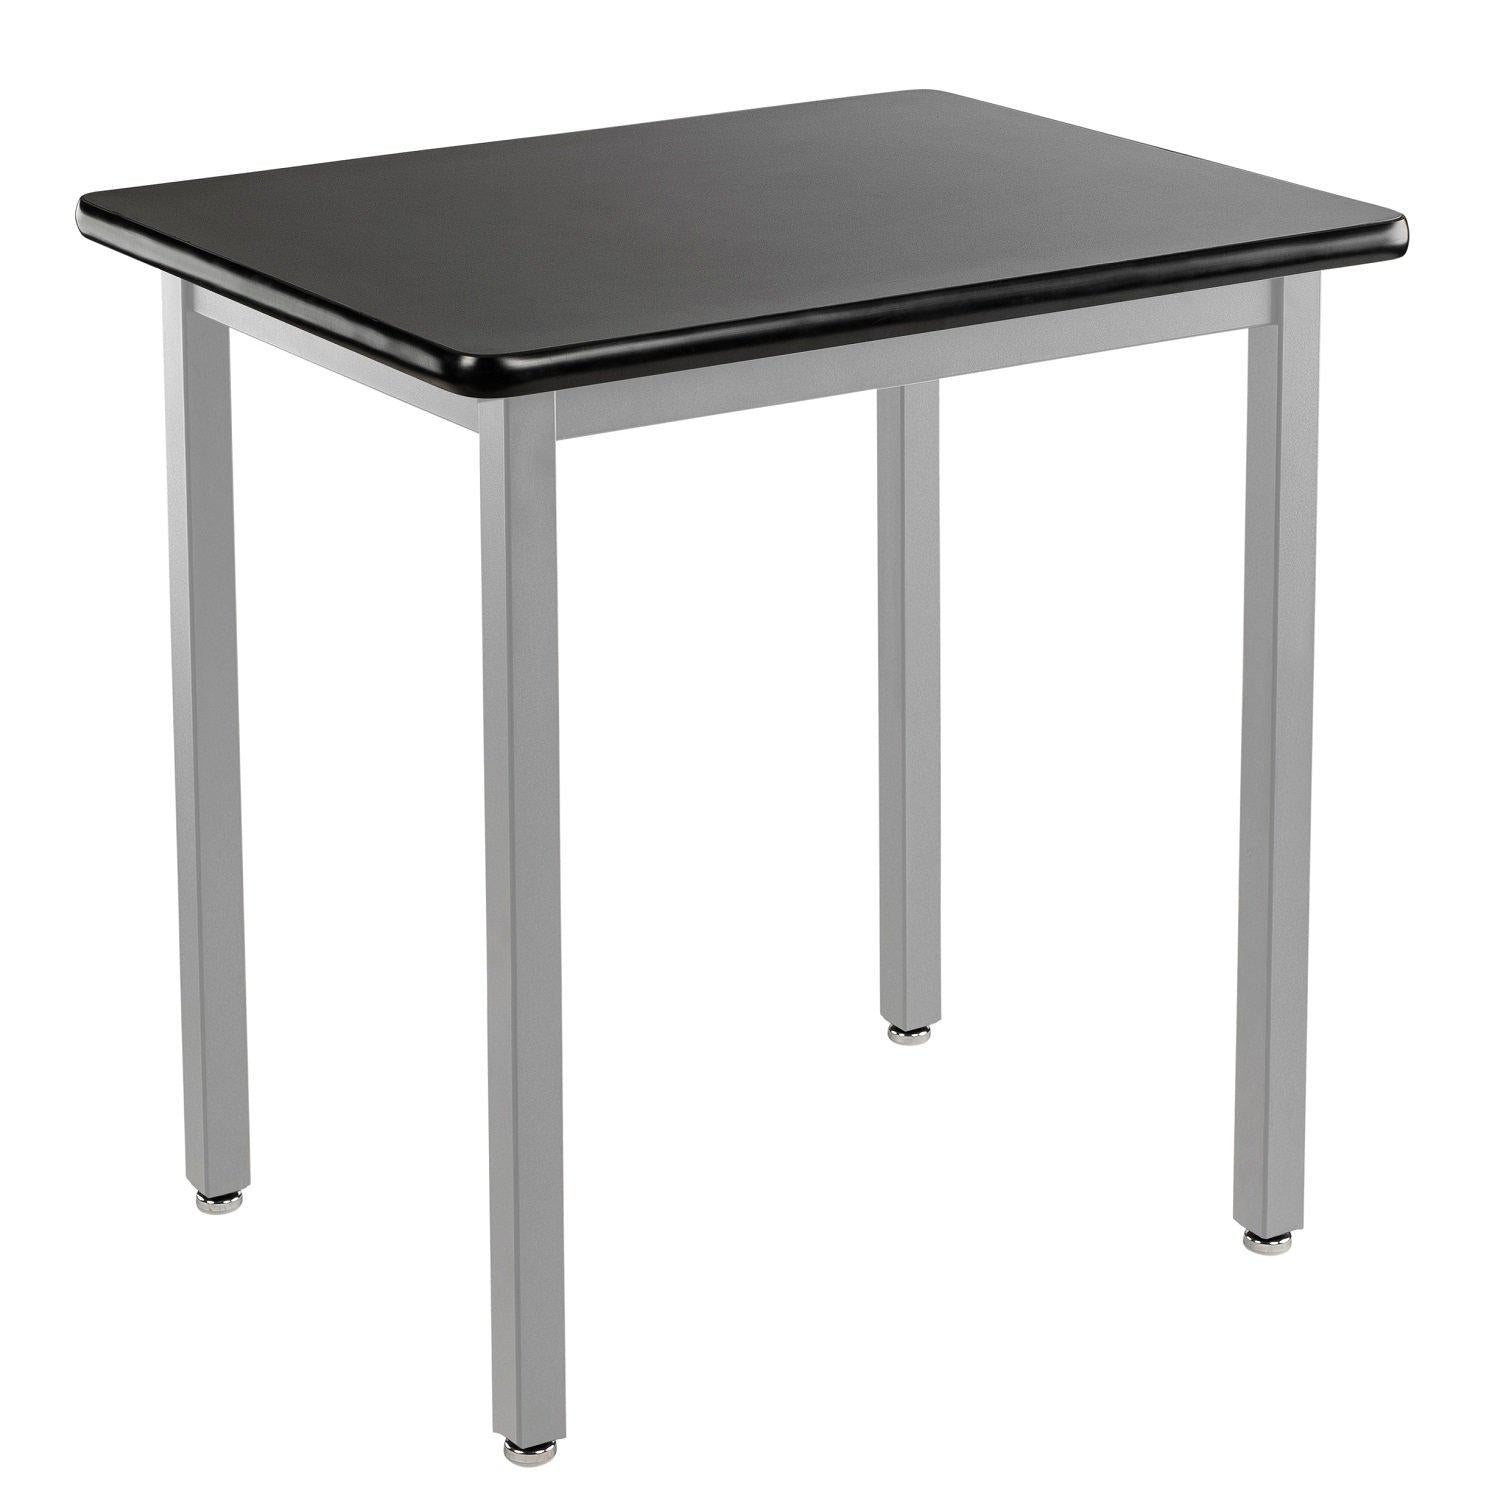 Heavy-Duty Fixed Height Utility Table, Soft Grey Frame, 36" x 36", High-Pressure Laminate Top with T-Mold Edge